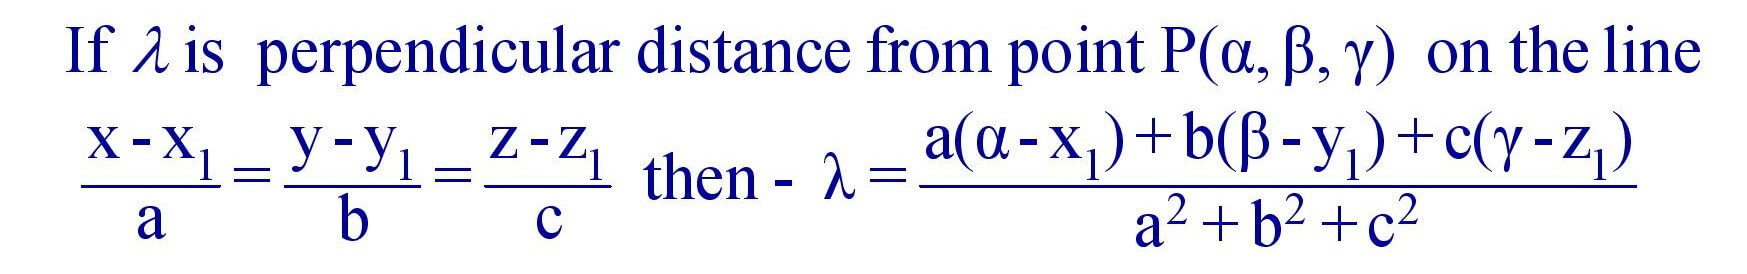 Perpendicular Distance of a Point from a line Cartesian Form